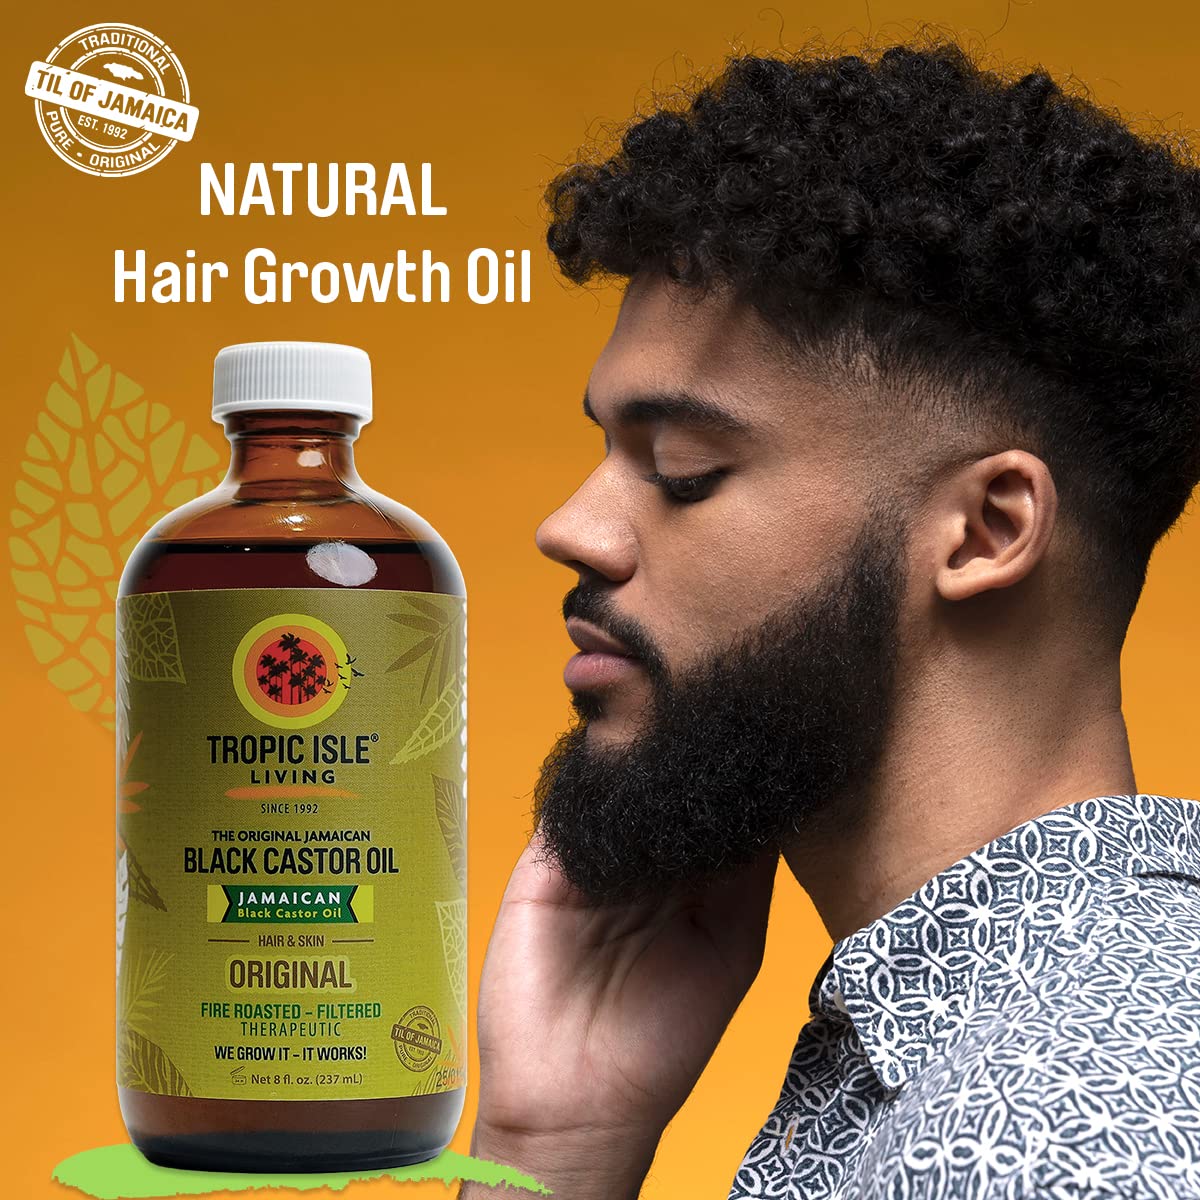 All Natural Jamaican Black Castor Oil | Rich in Vitamin E, Omega Fatty Acids and Minerals | For Hair Growth Oil, Skin Conditioning, Eyebrows & Eyelashes, Scalp and Nail Care | Grow, Strengthen, Moisture & Repair - Glass Bottle 8oz